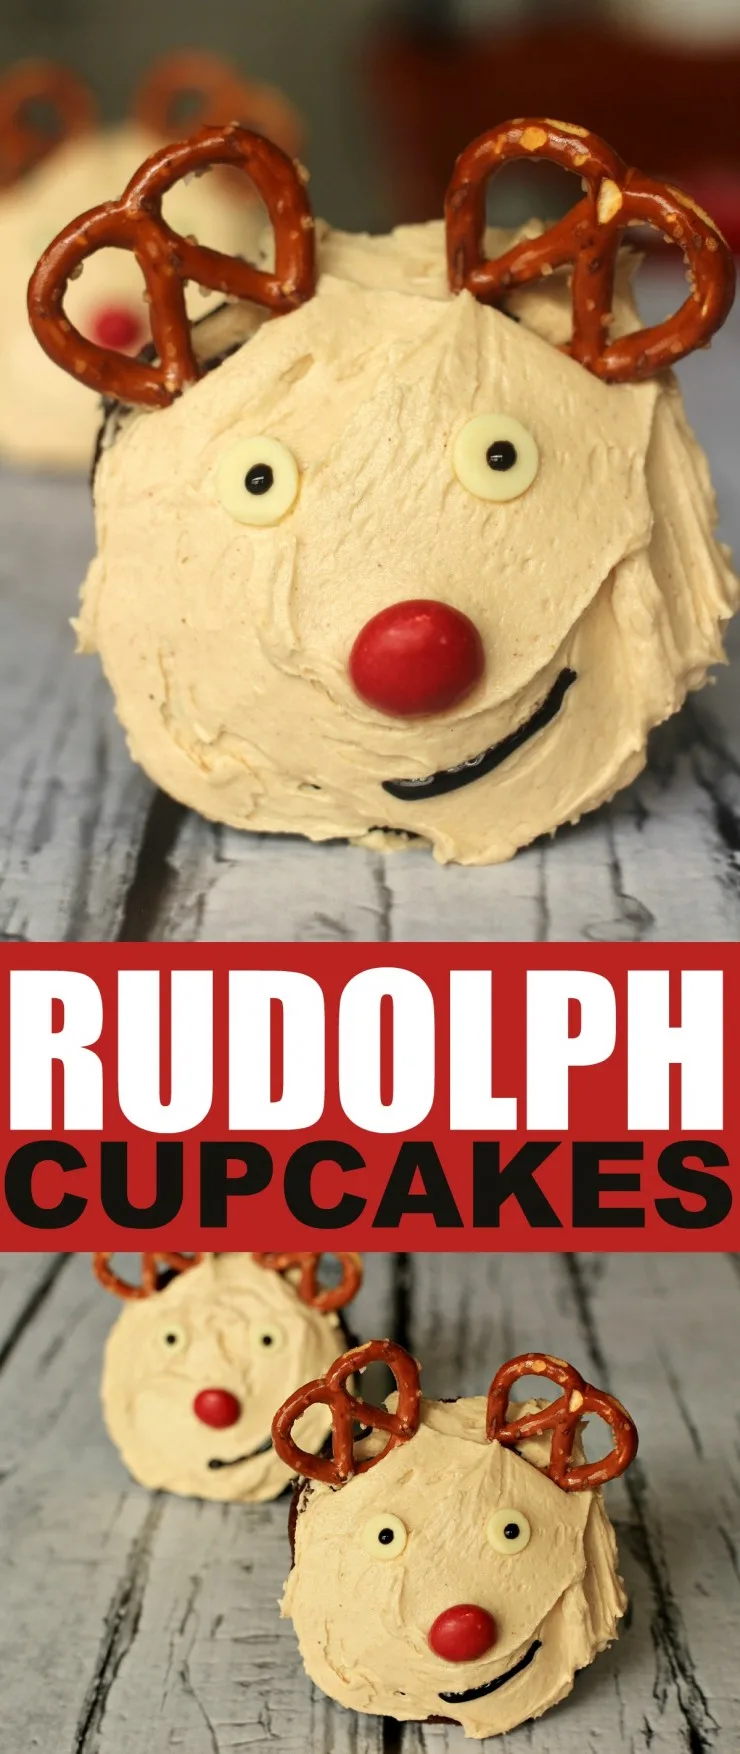 These Rudolph the Red Nosed Reindeer Cupcakes aren't just cute, they are made from scratch chocolate and peanut butter treats.  Absolute perfection! 